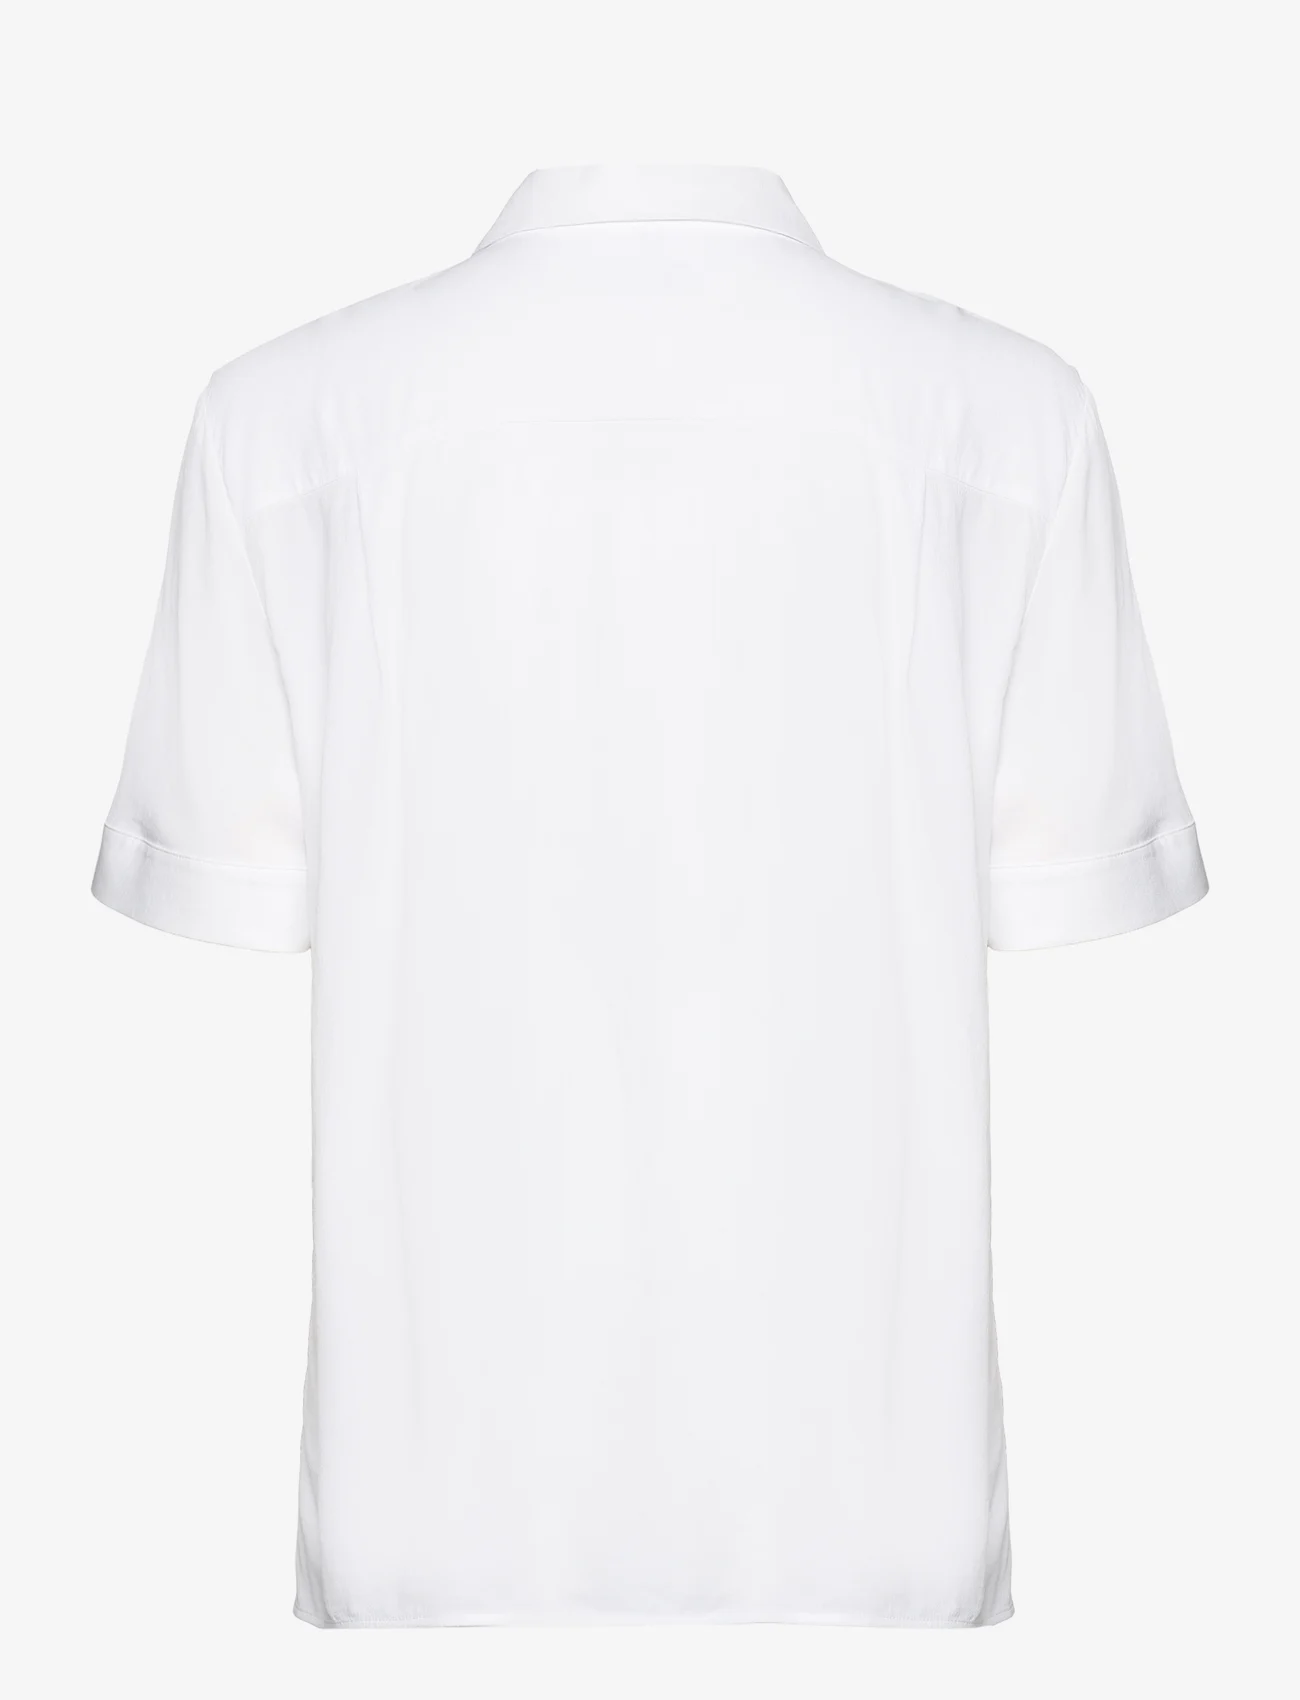 Tommy Hilfiger - ESSENTIAL FLUID SS SHIRT - short-sleeved shirts - th optic white - 1